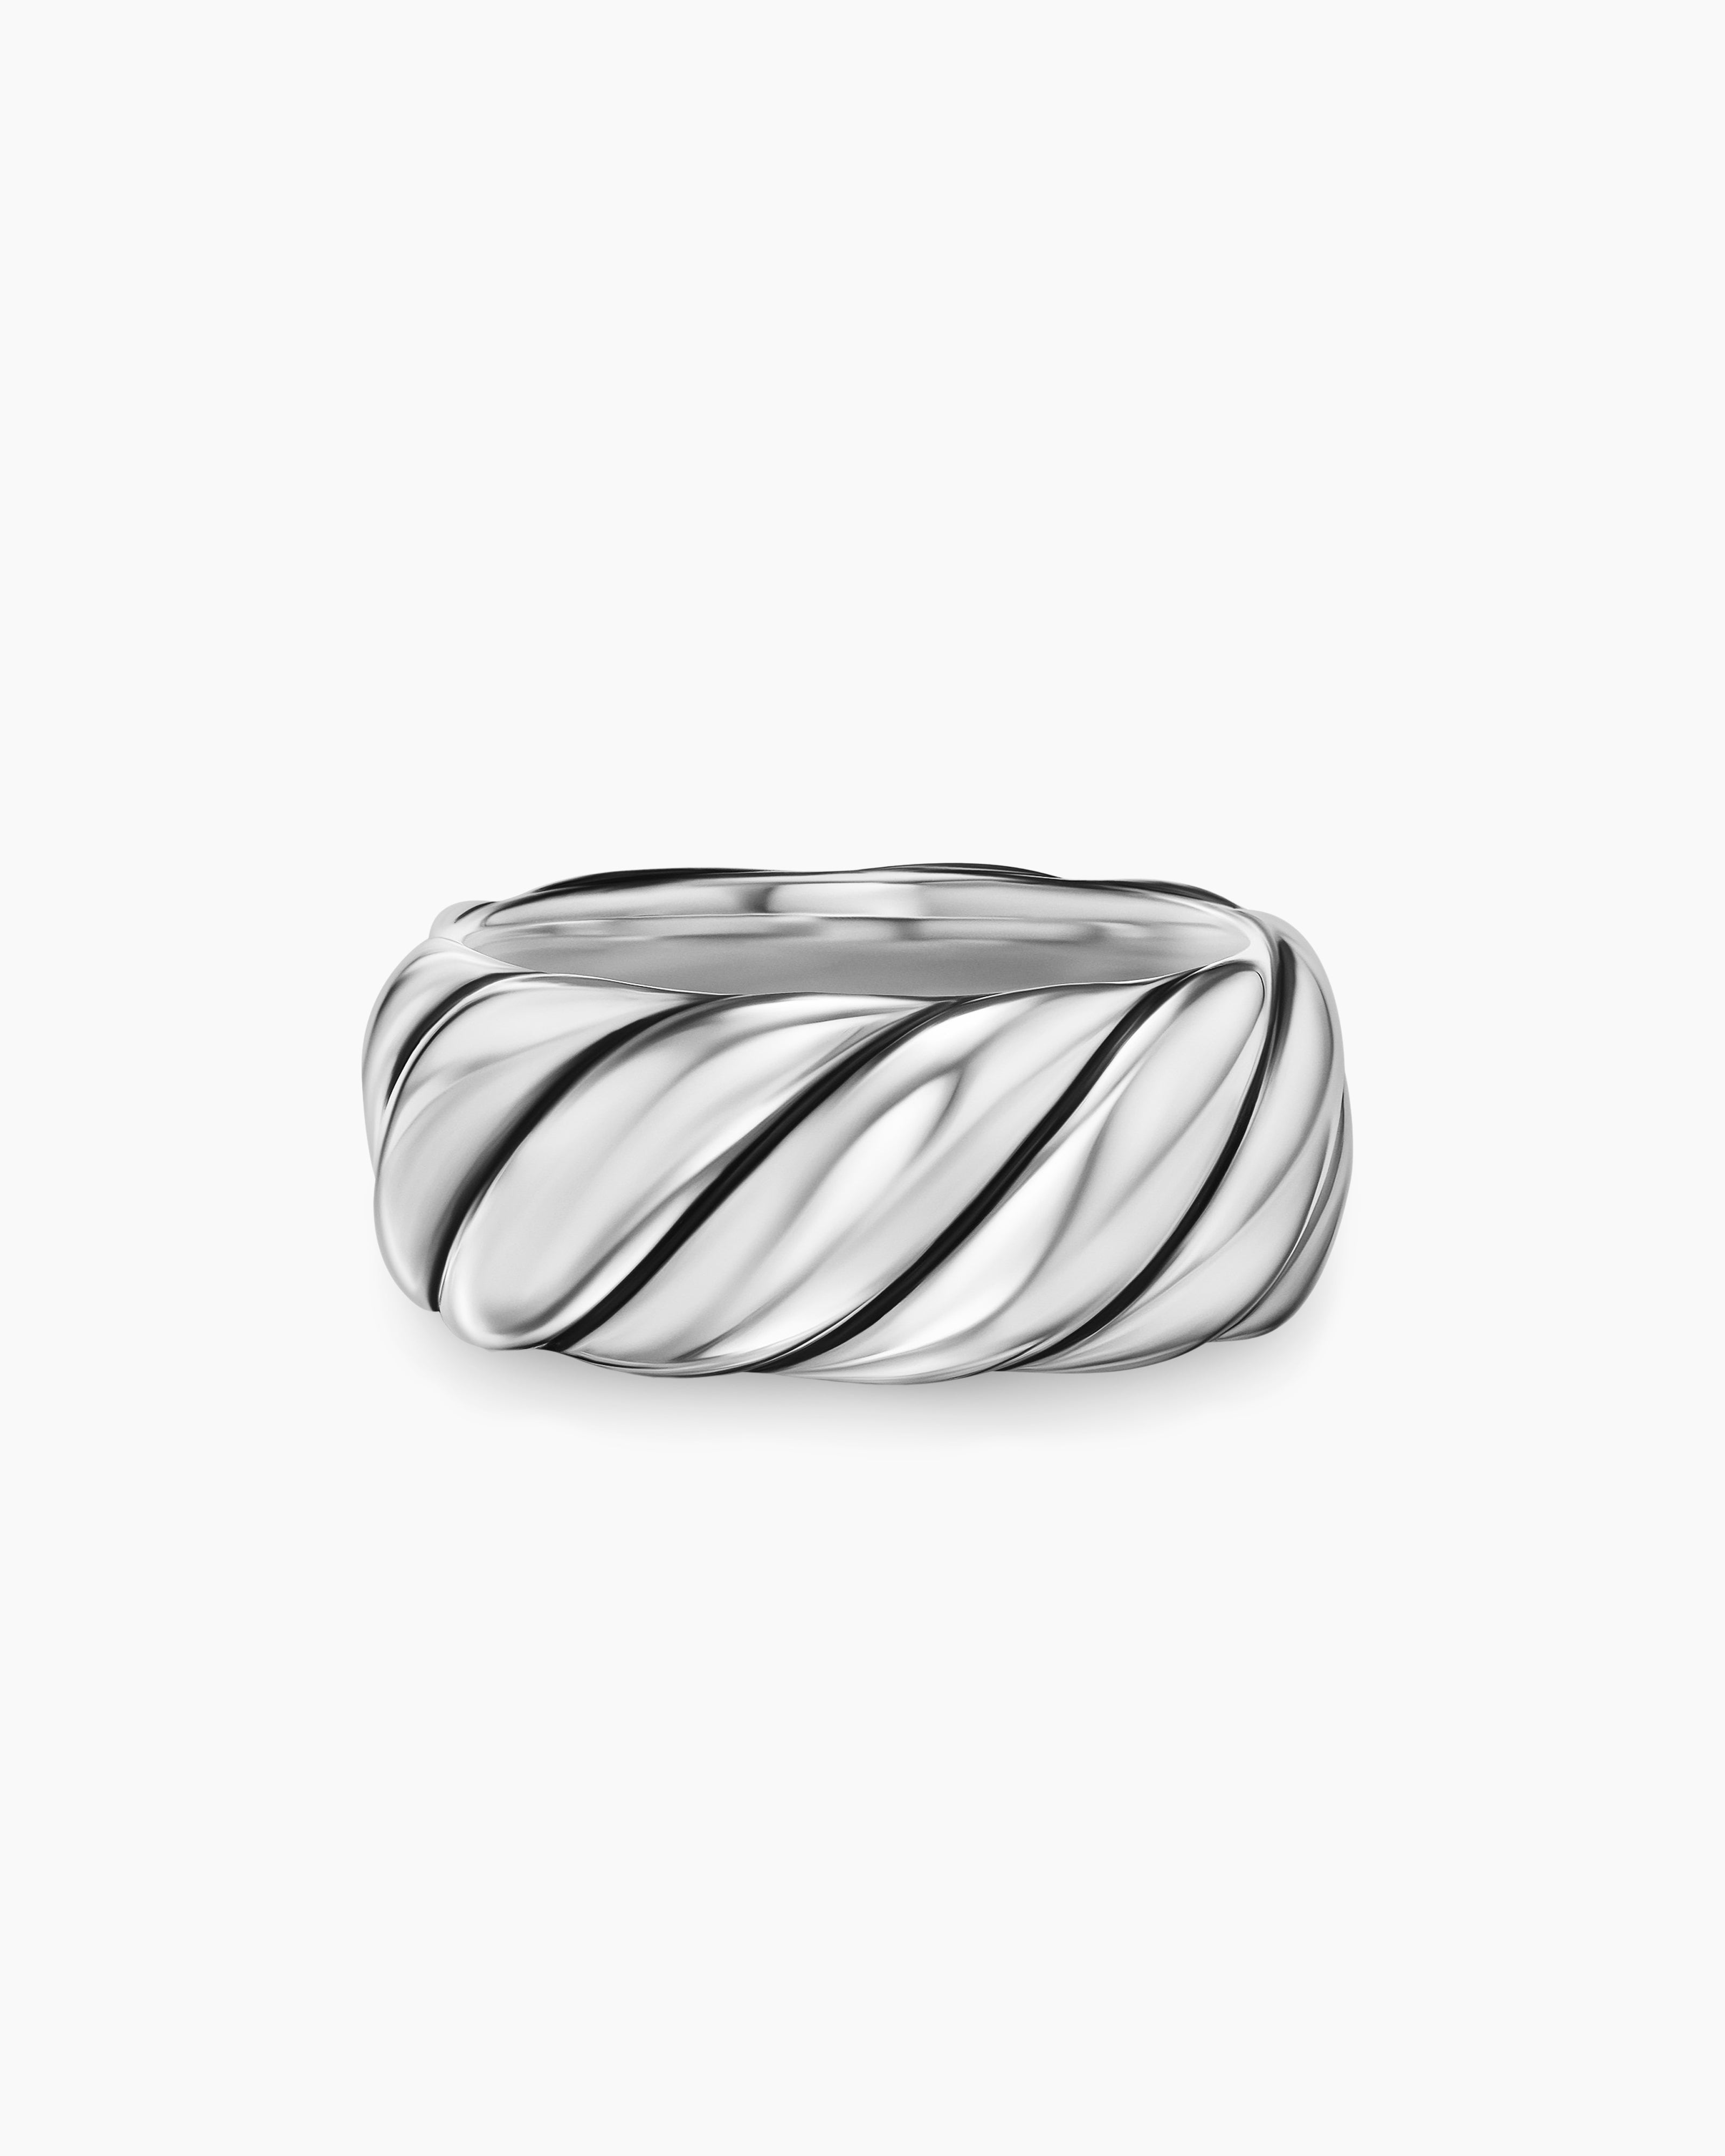 Sculpted Cable Band Ring in Sterling Silver, 9mm | David Yurman Canada